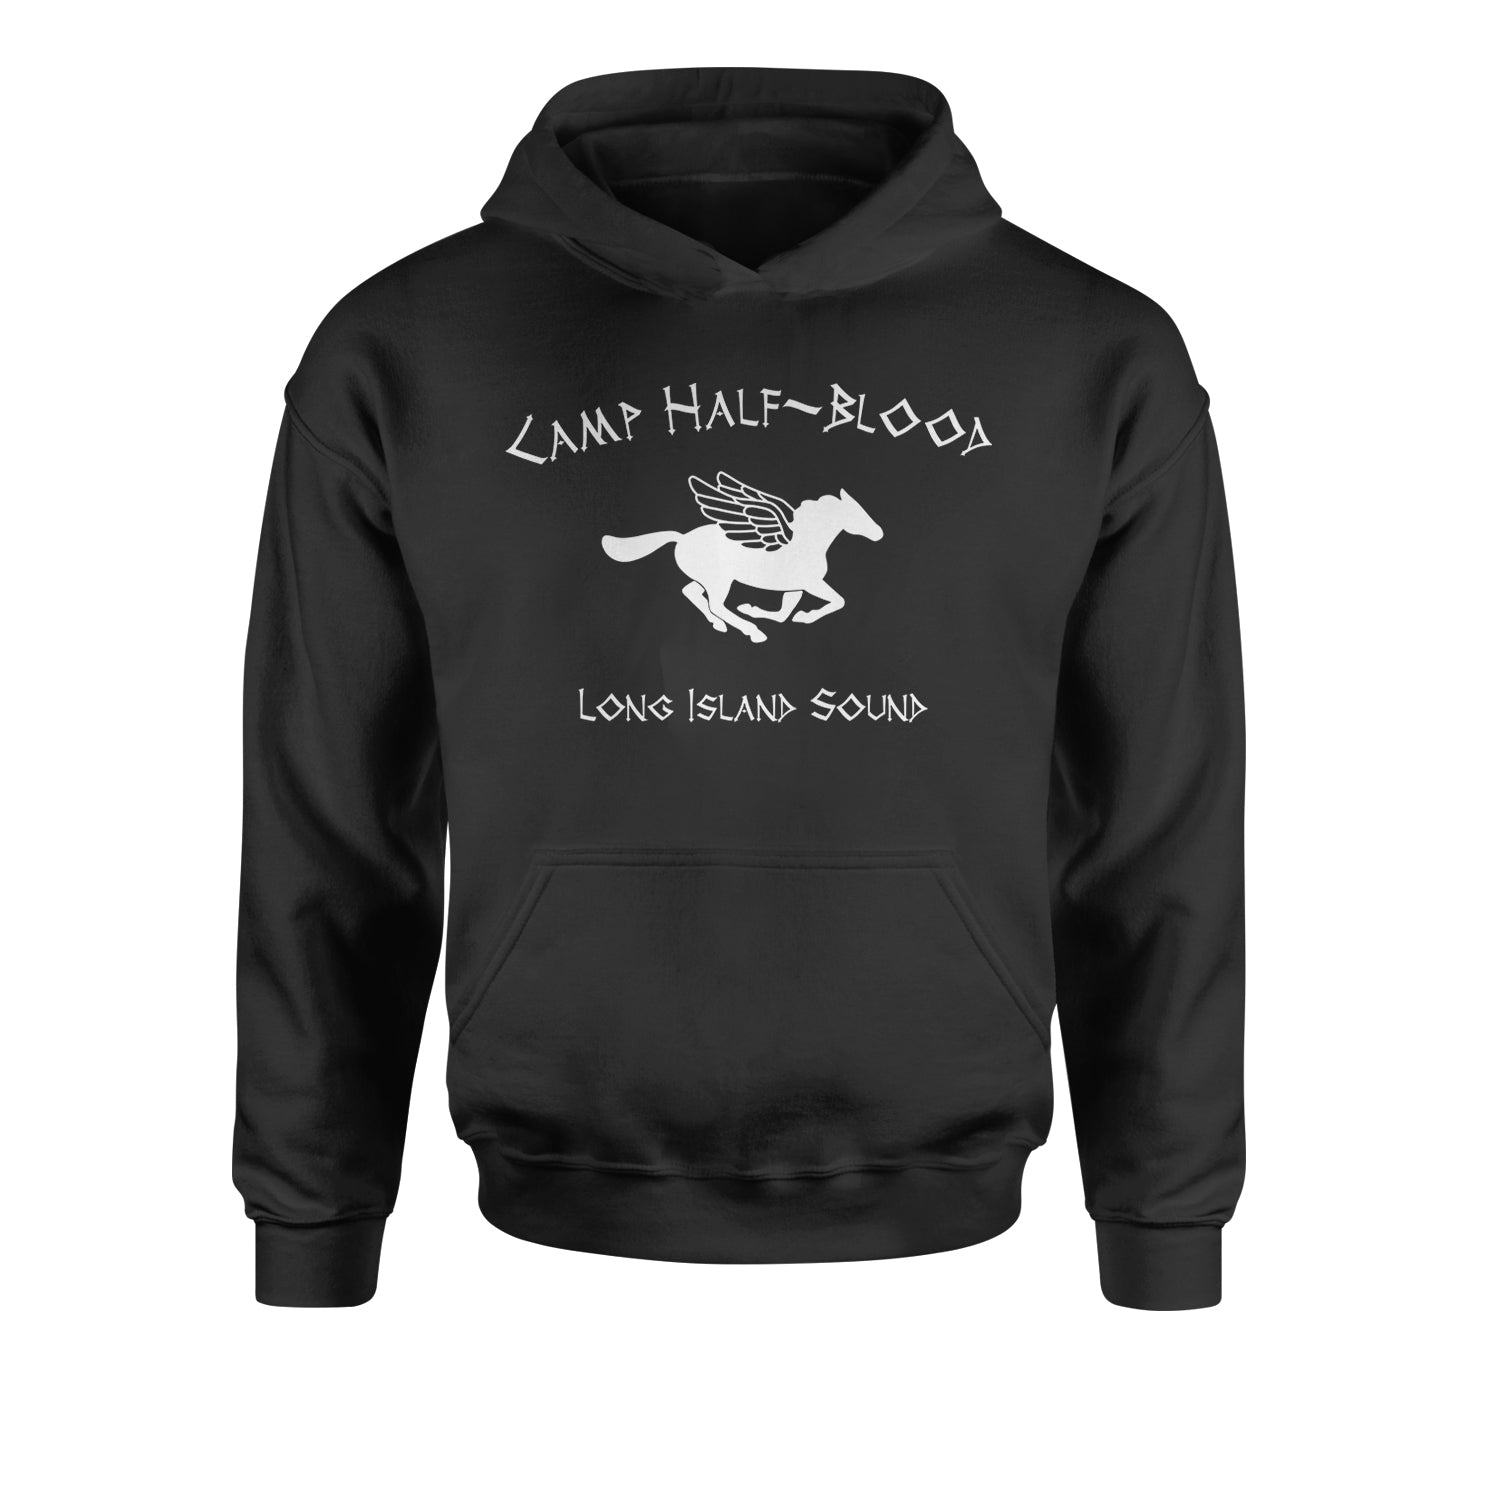 Camp Half Blood Long Island Sound Youth-Sized Hoodie and, apollo, blood, camp, half, jackson, jupiter, olympians, percy, the by Expression Tees